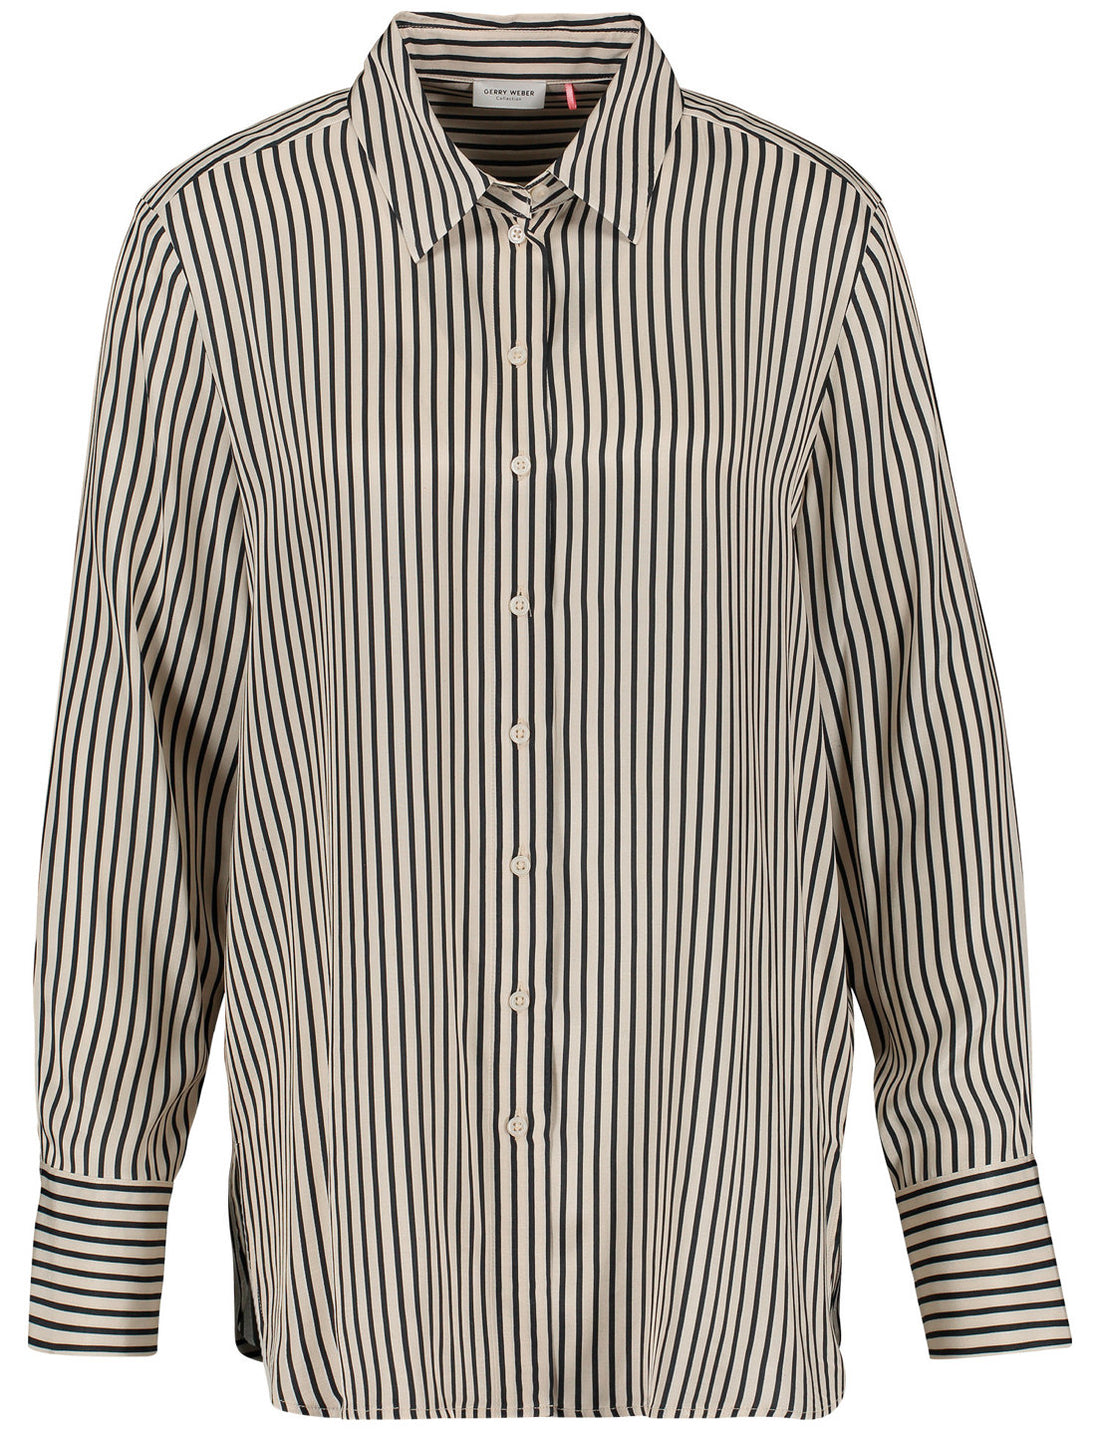 Striped Shirt Blouse With A Rounded Hem_360004-31401_9016_02